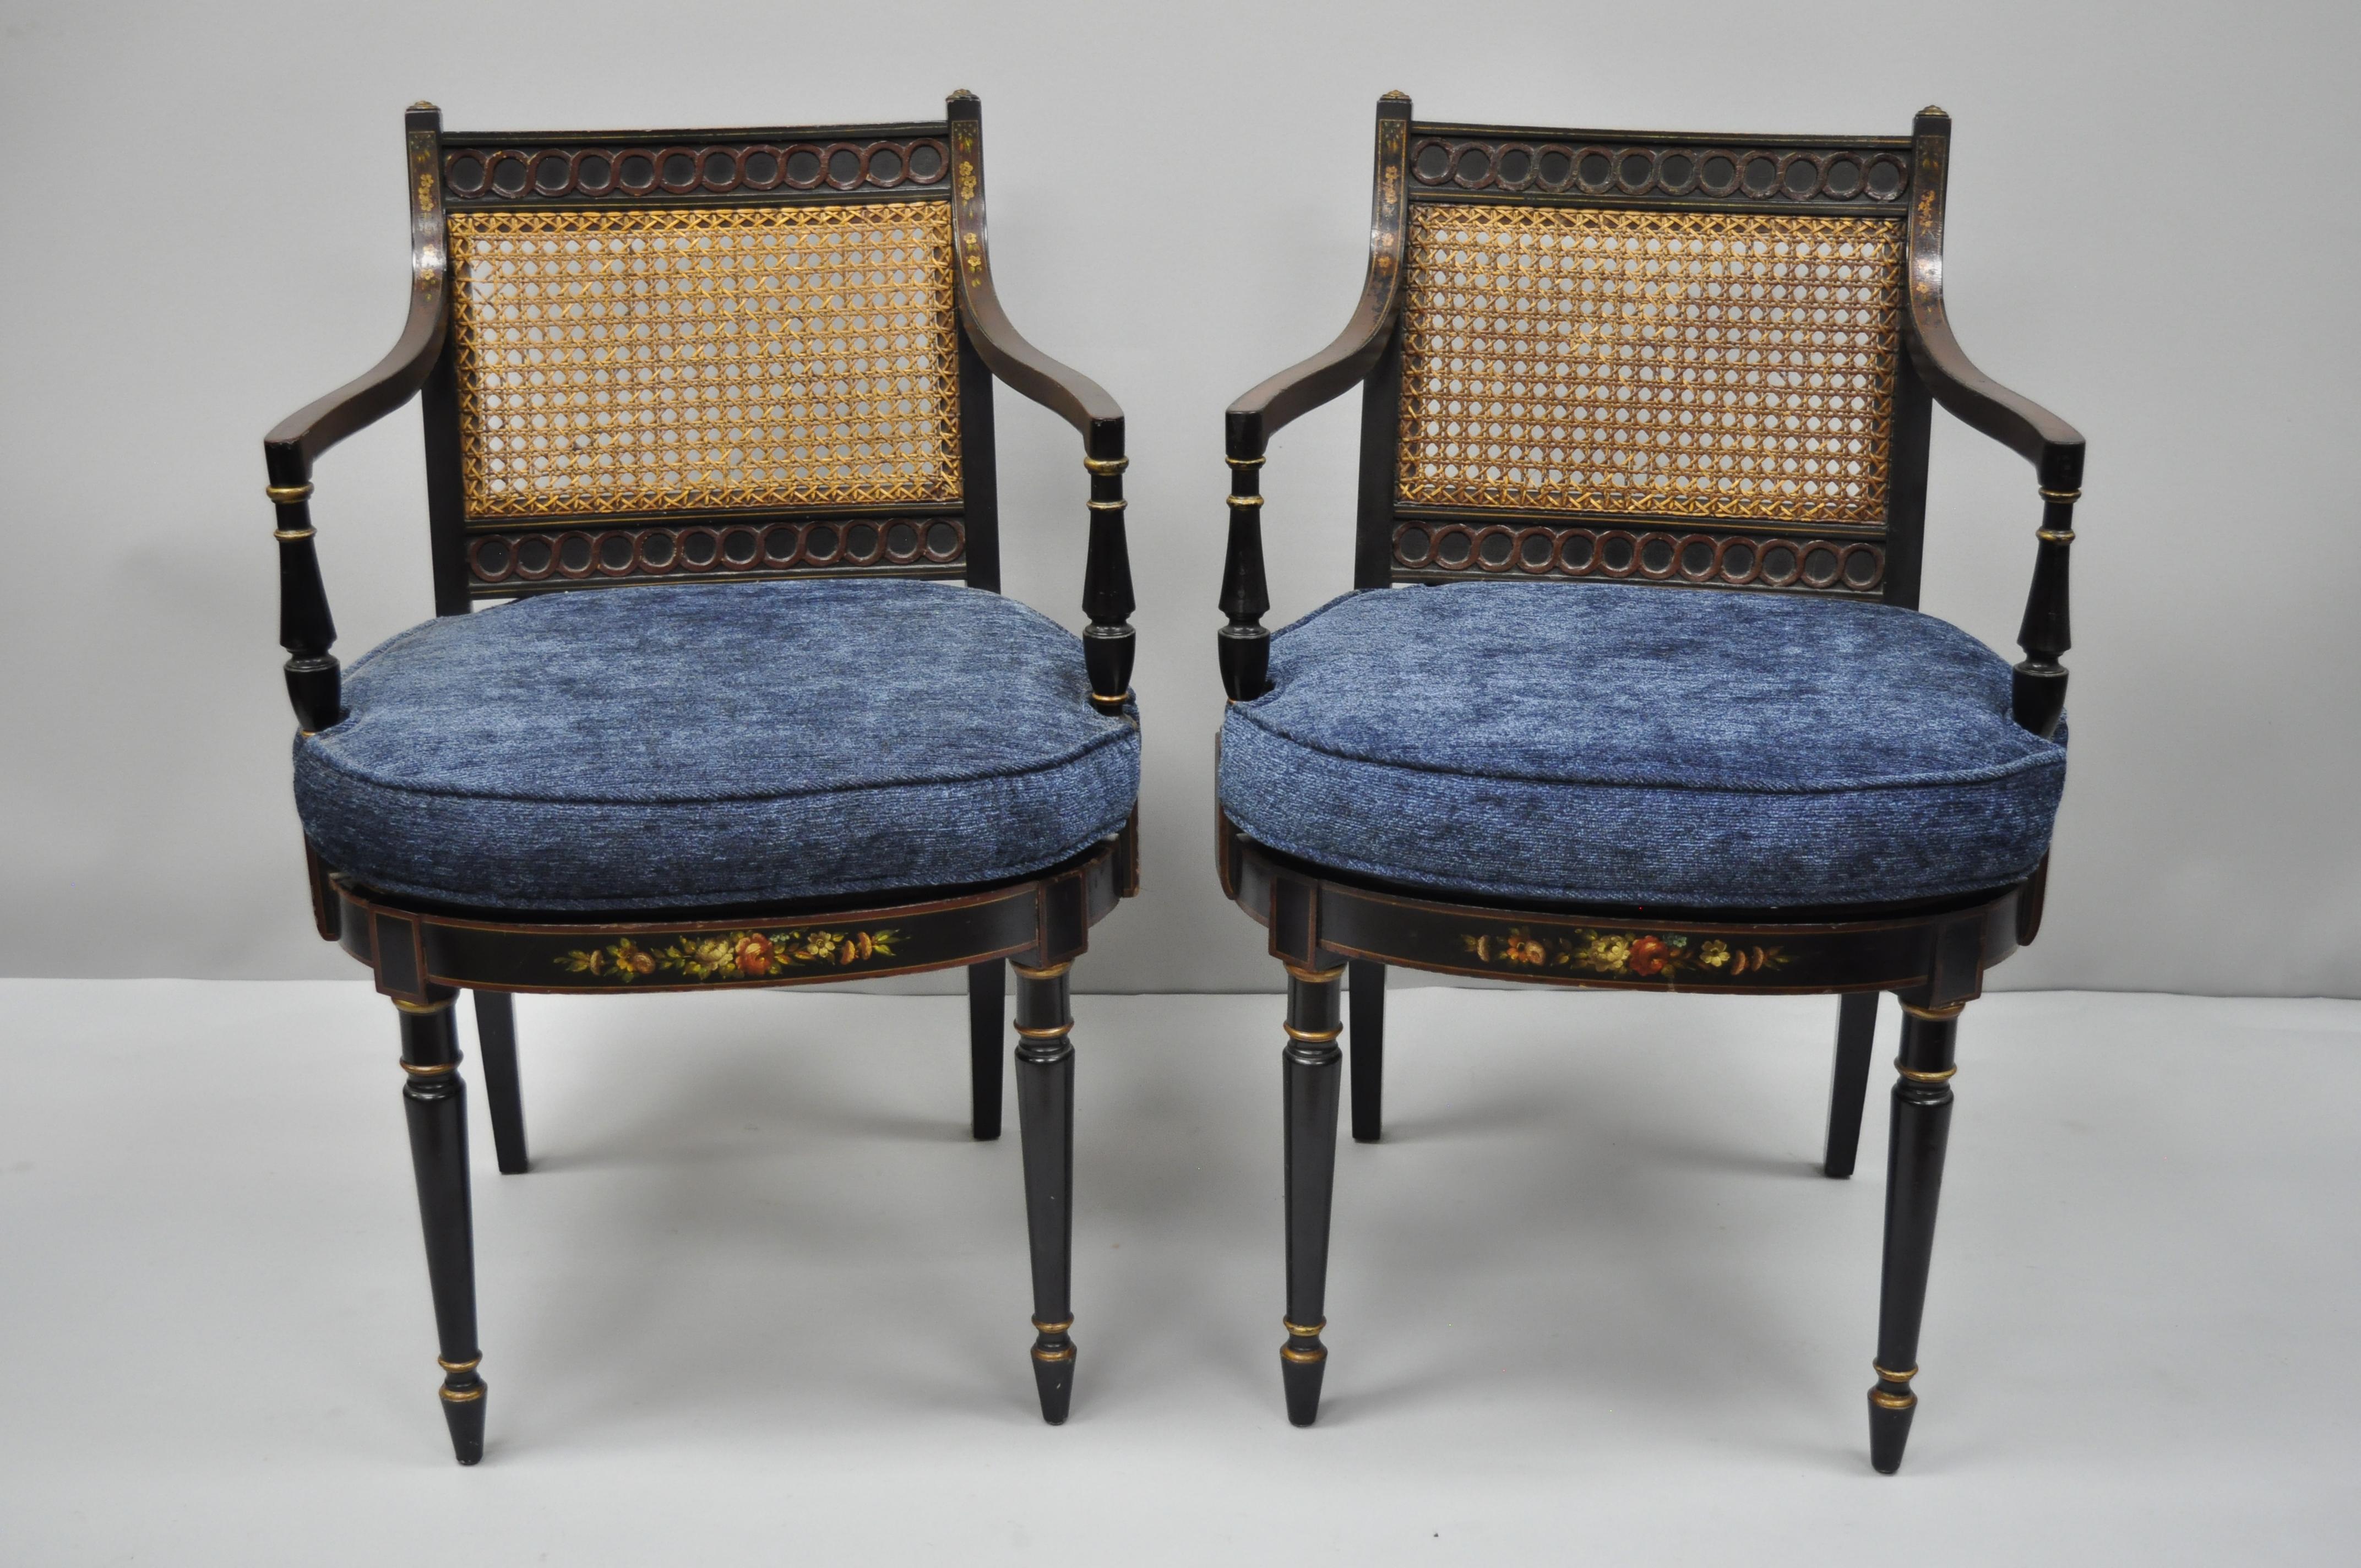 Pair of antique English regency style black lacquer cane armchairs. Items feature blue loose cushions, cane back and seats, hand painted floral accents, black lacquer finish, circa early 20th century. Measurements: 33